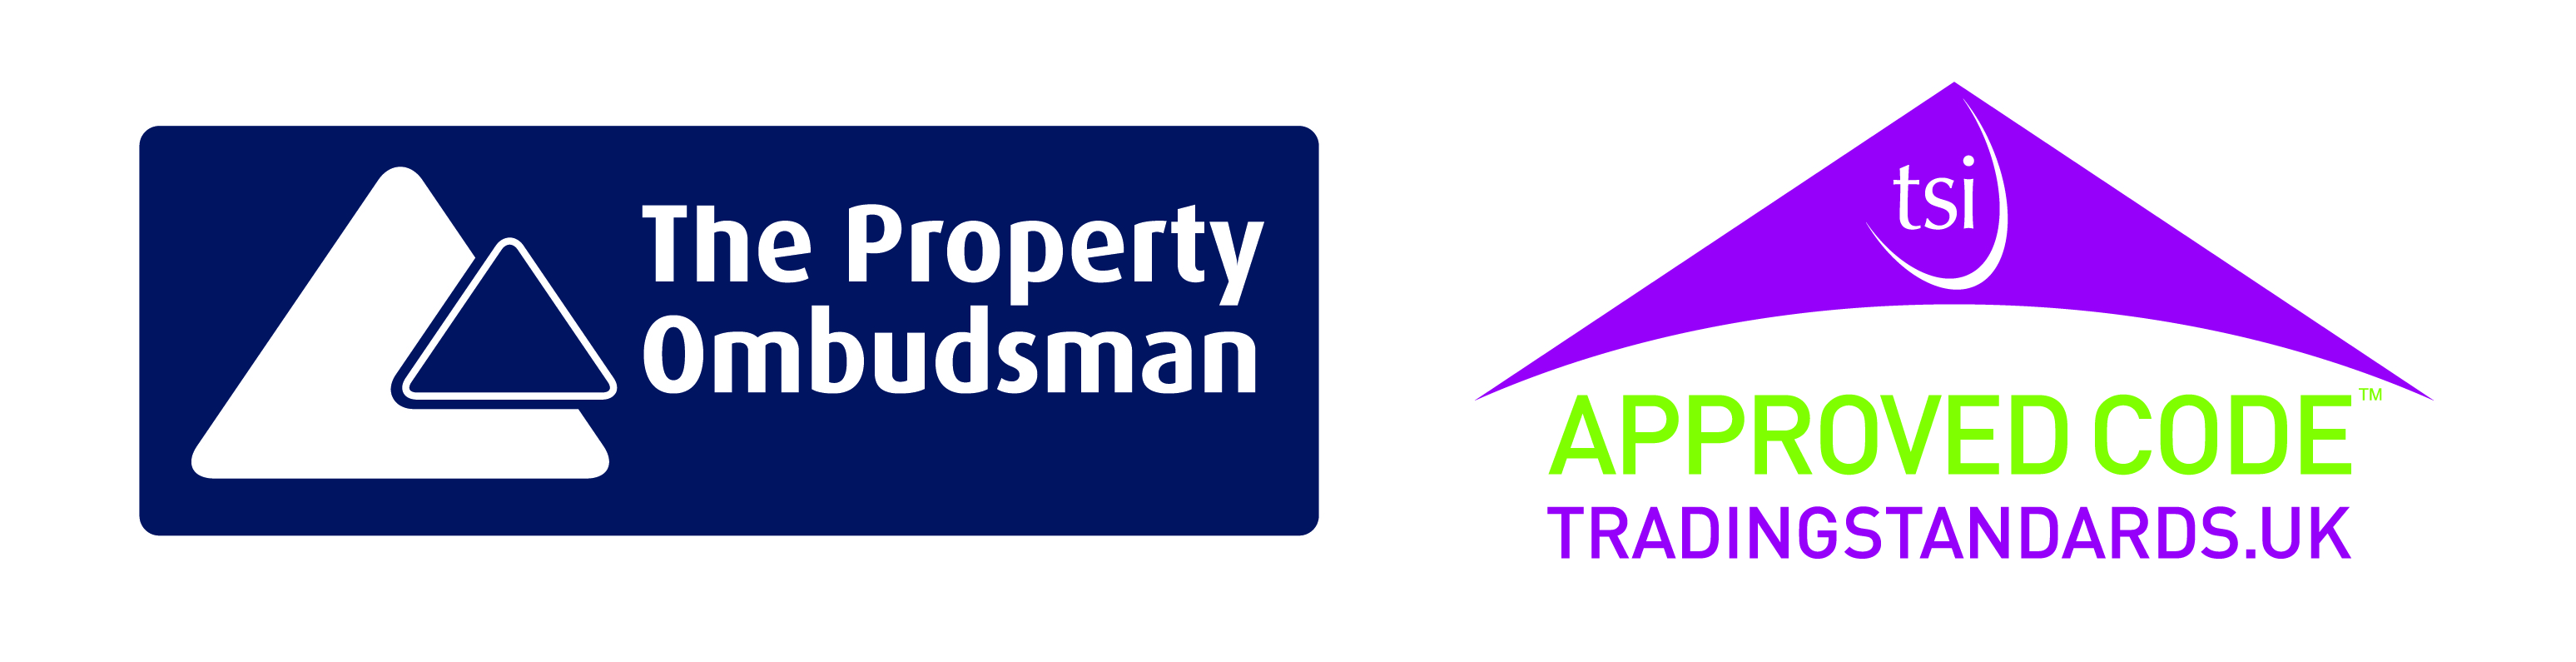 Castle Estate Agents Ltd. are members of the Property Ombudsman. Castle Estate Agents Ltd. are approved by Trading Standards UK.